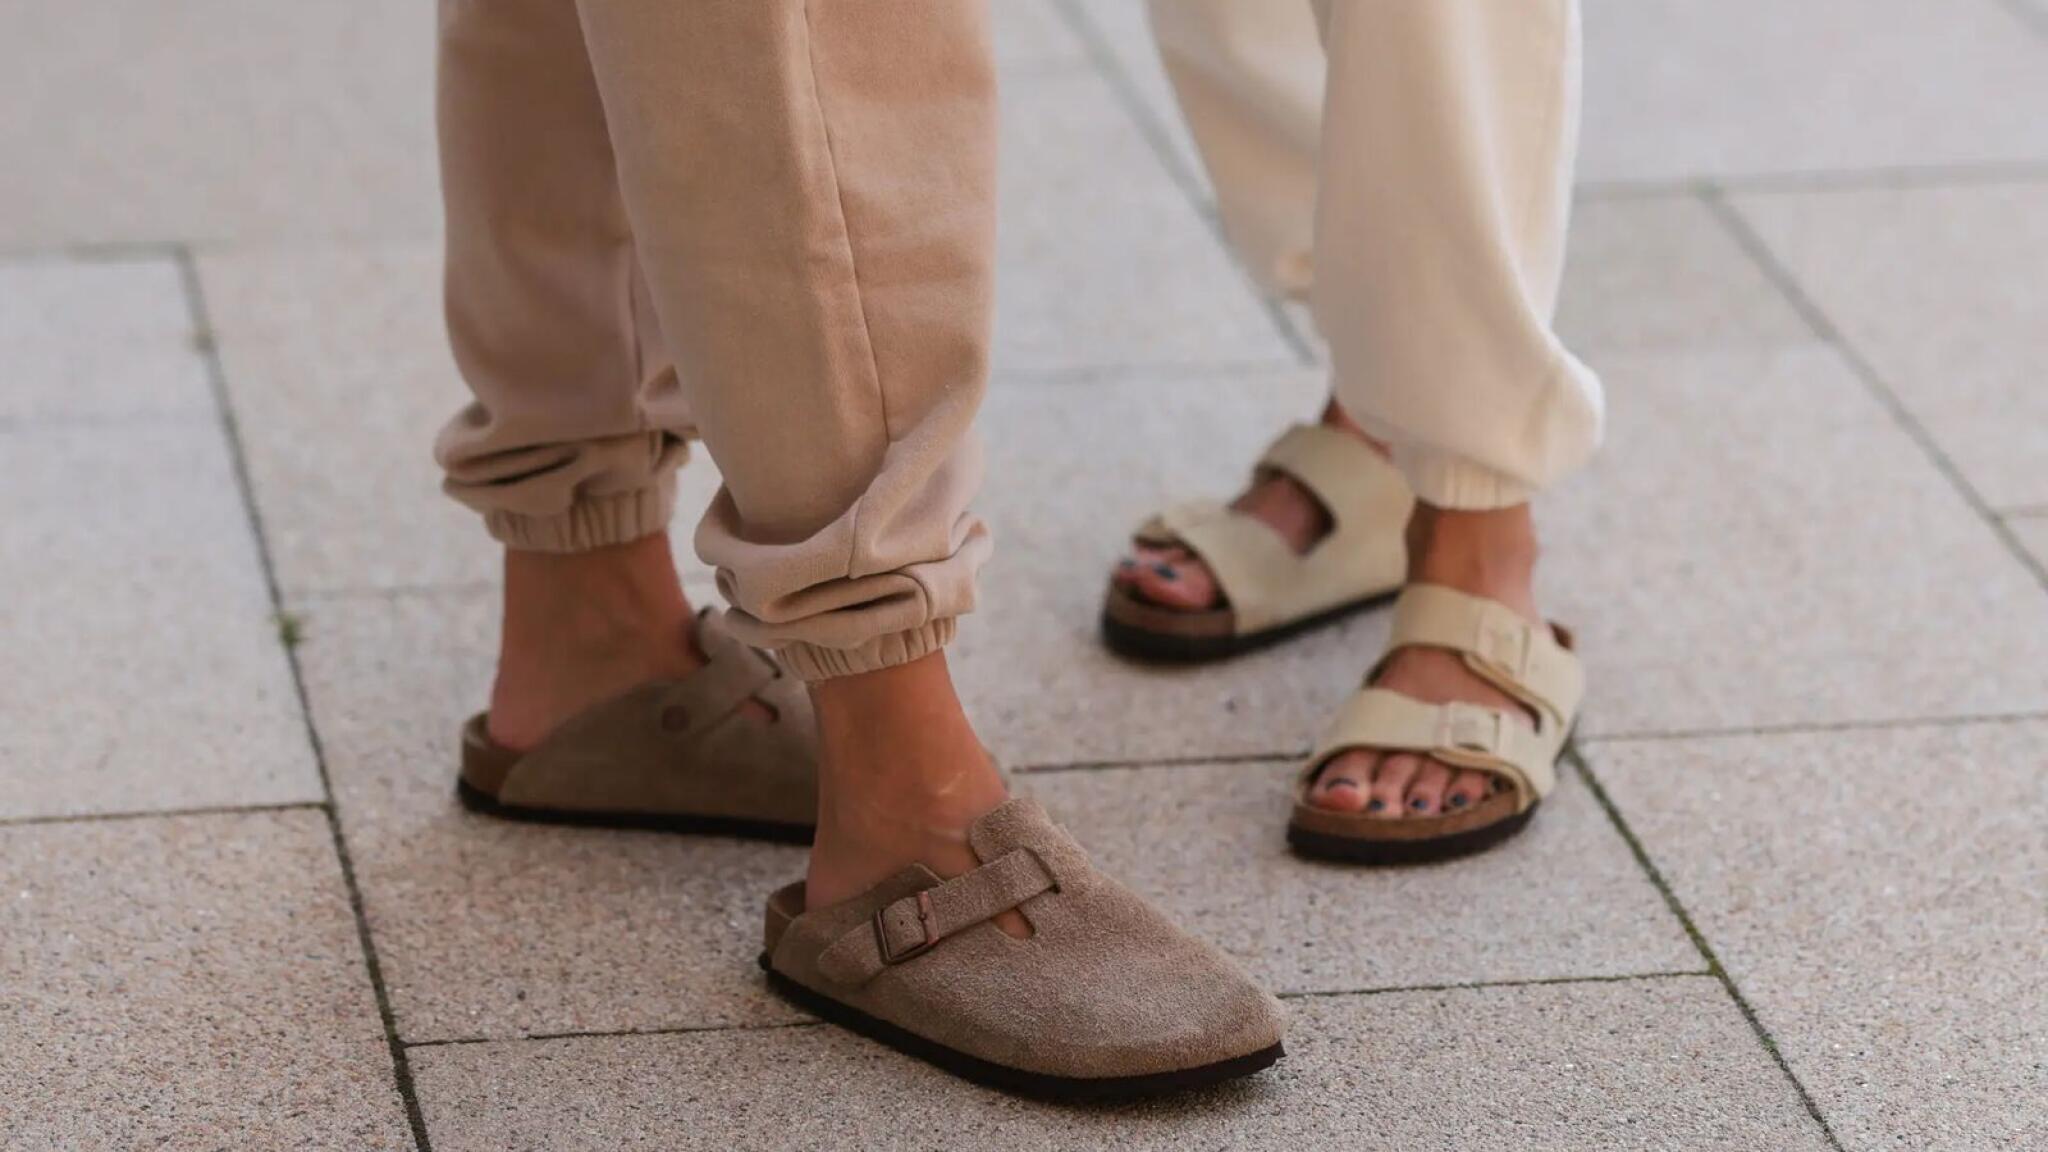 LVMH-Backed L Catterton Said to Near Deal to Buy Birkenstock